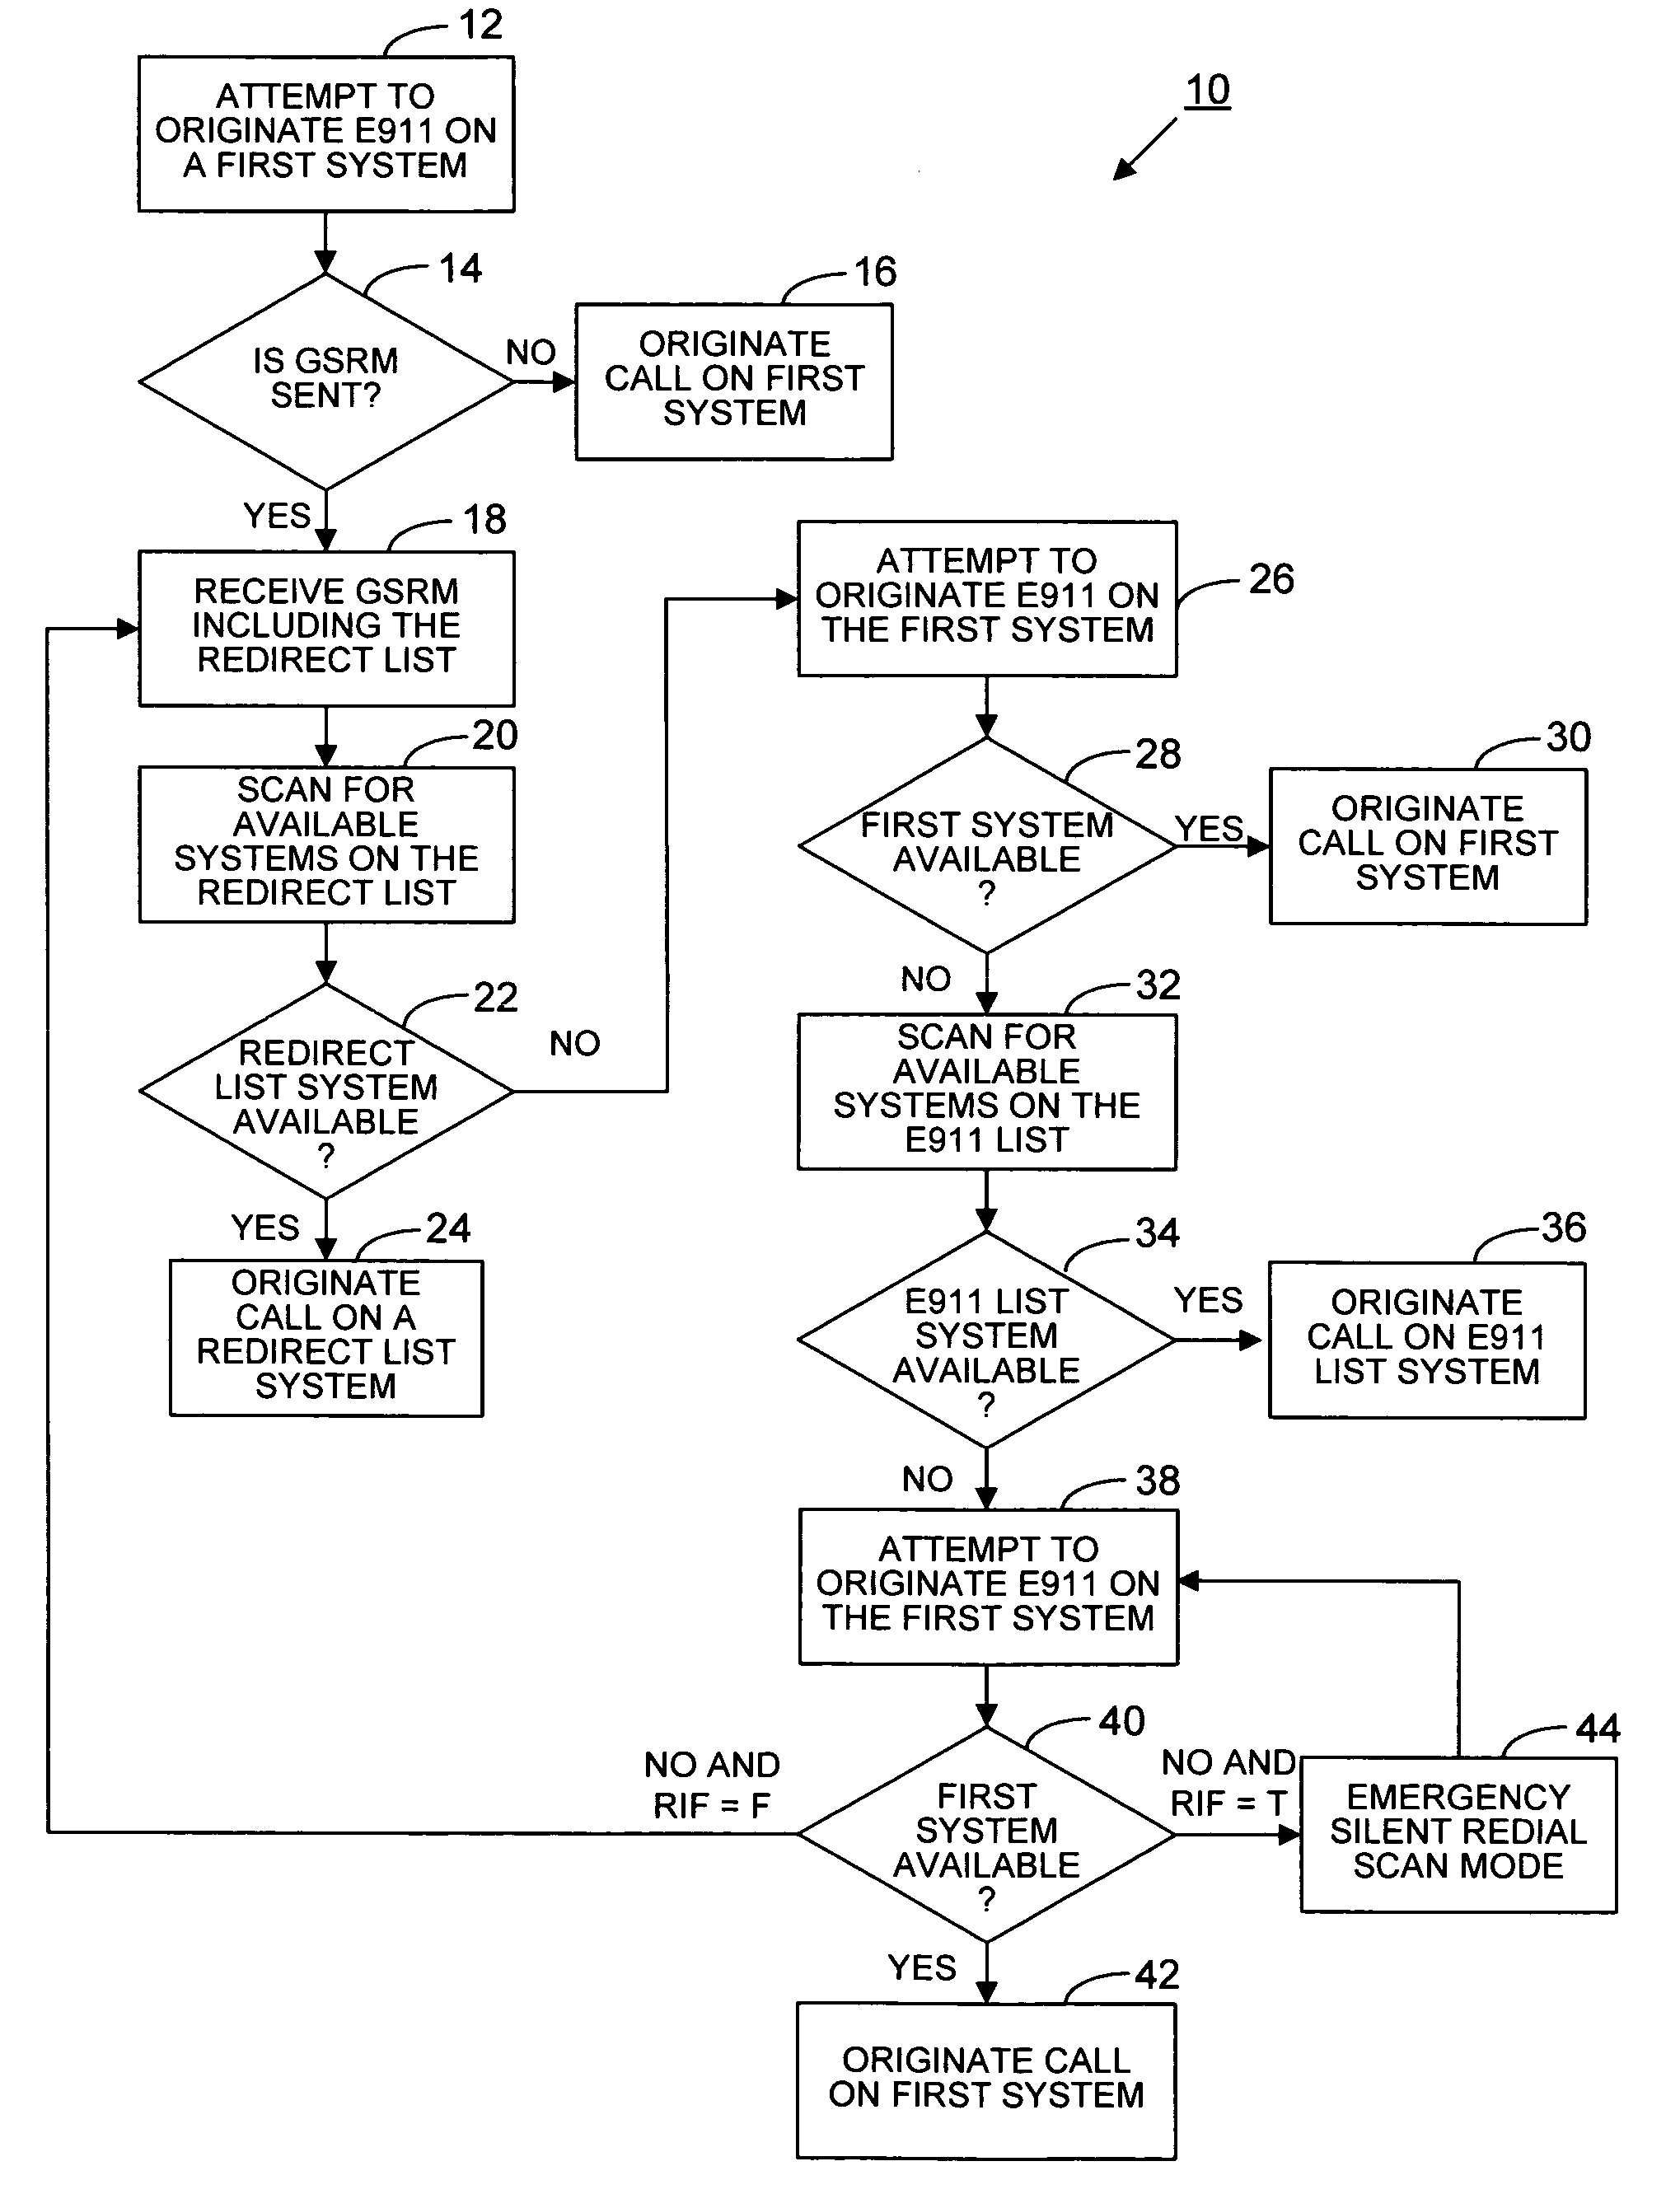 E911 behavior with GSRM in a wireless communication device